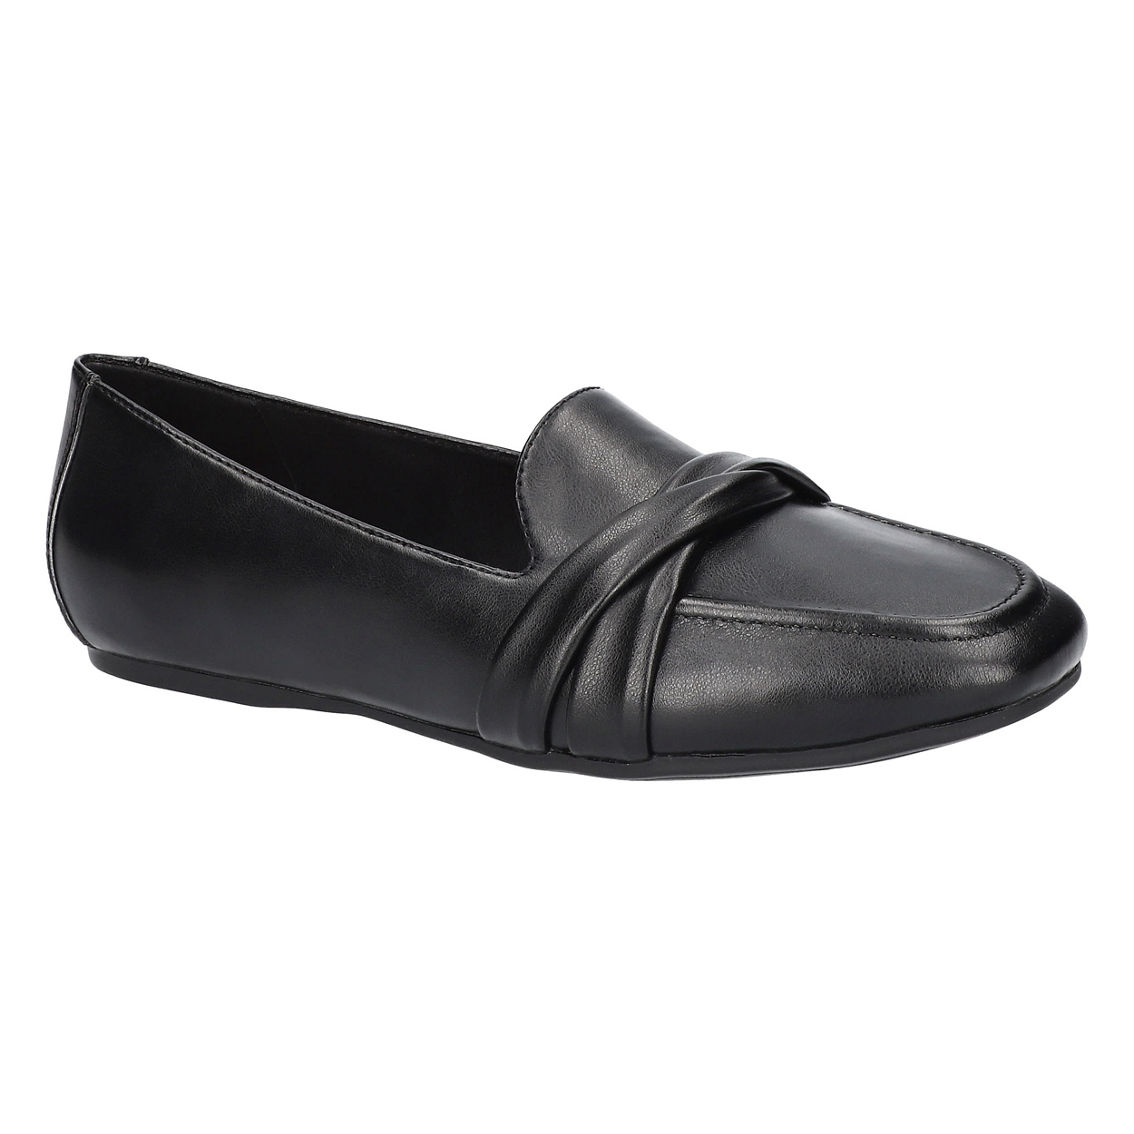 Betty by Easy Street Square Toe Flats